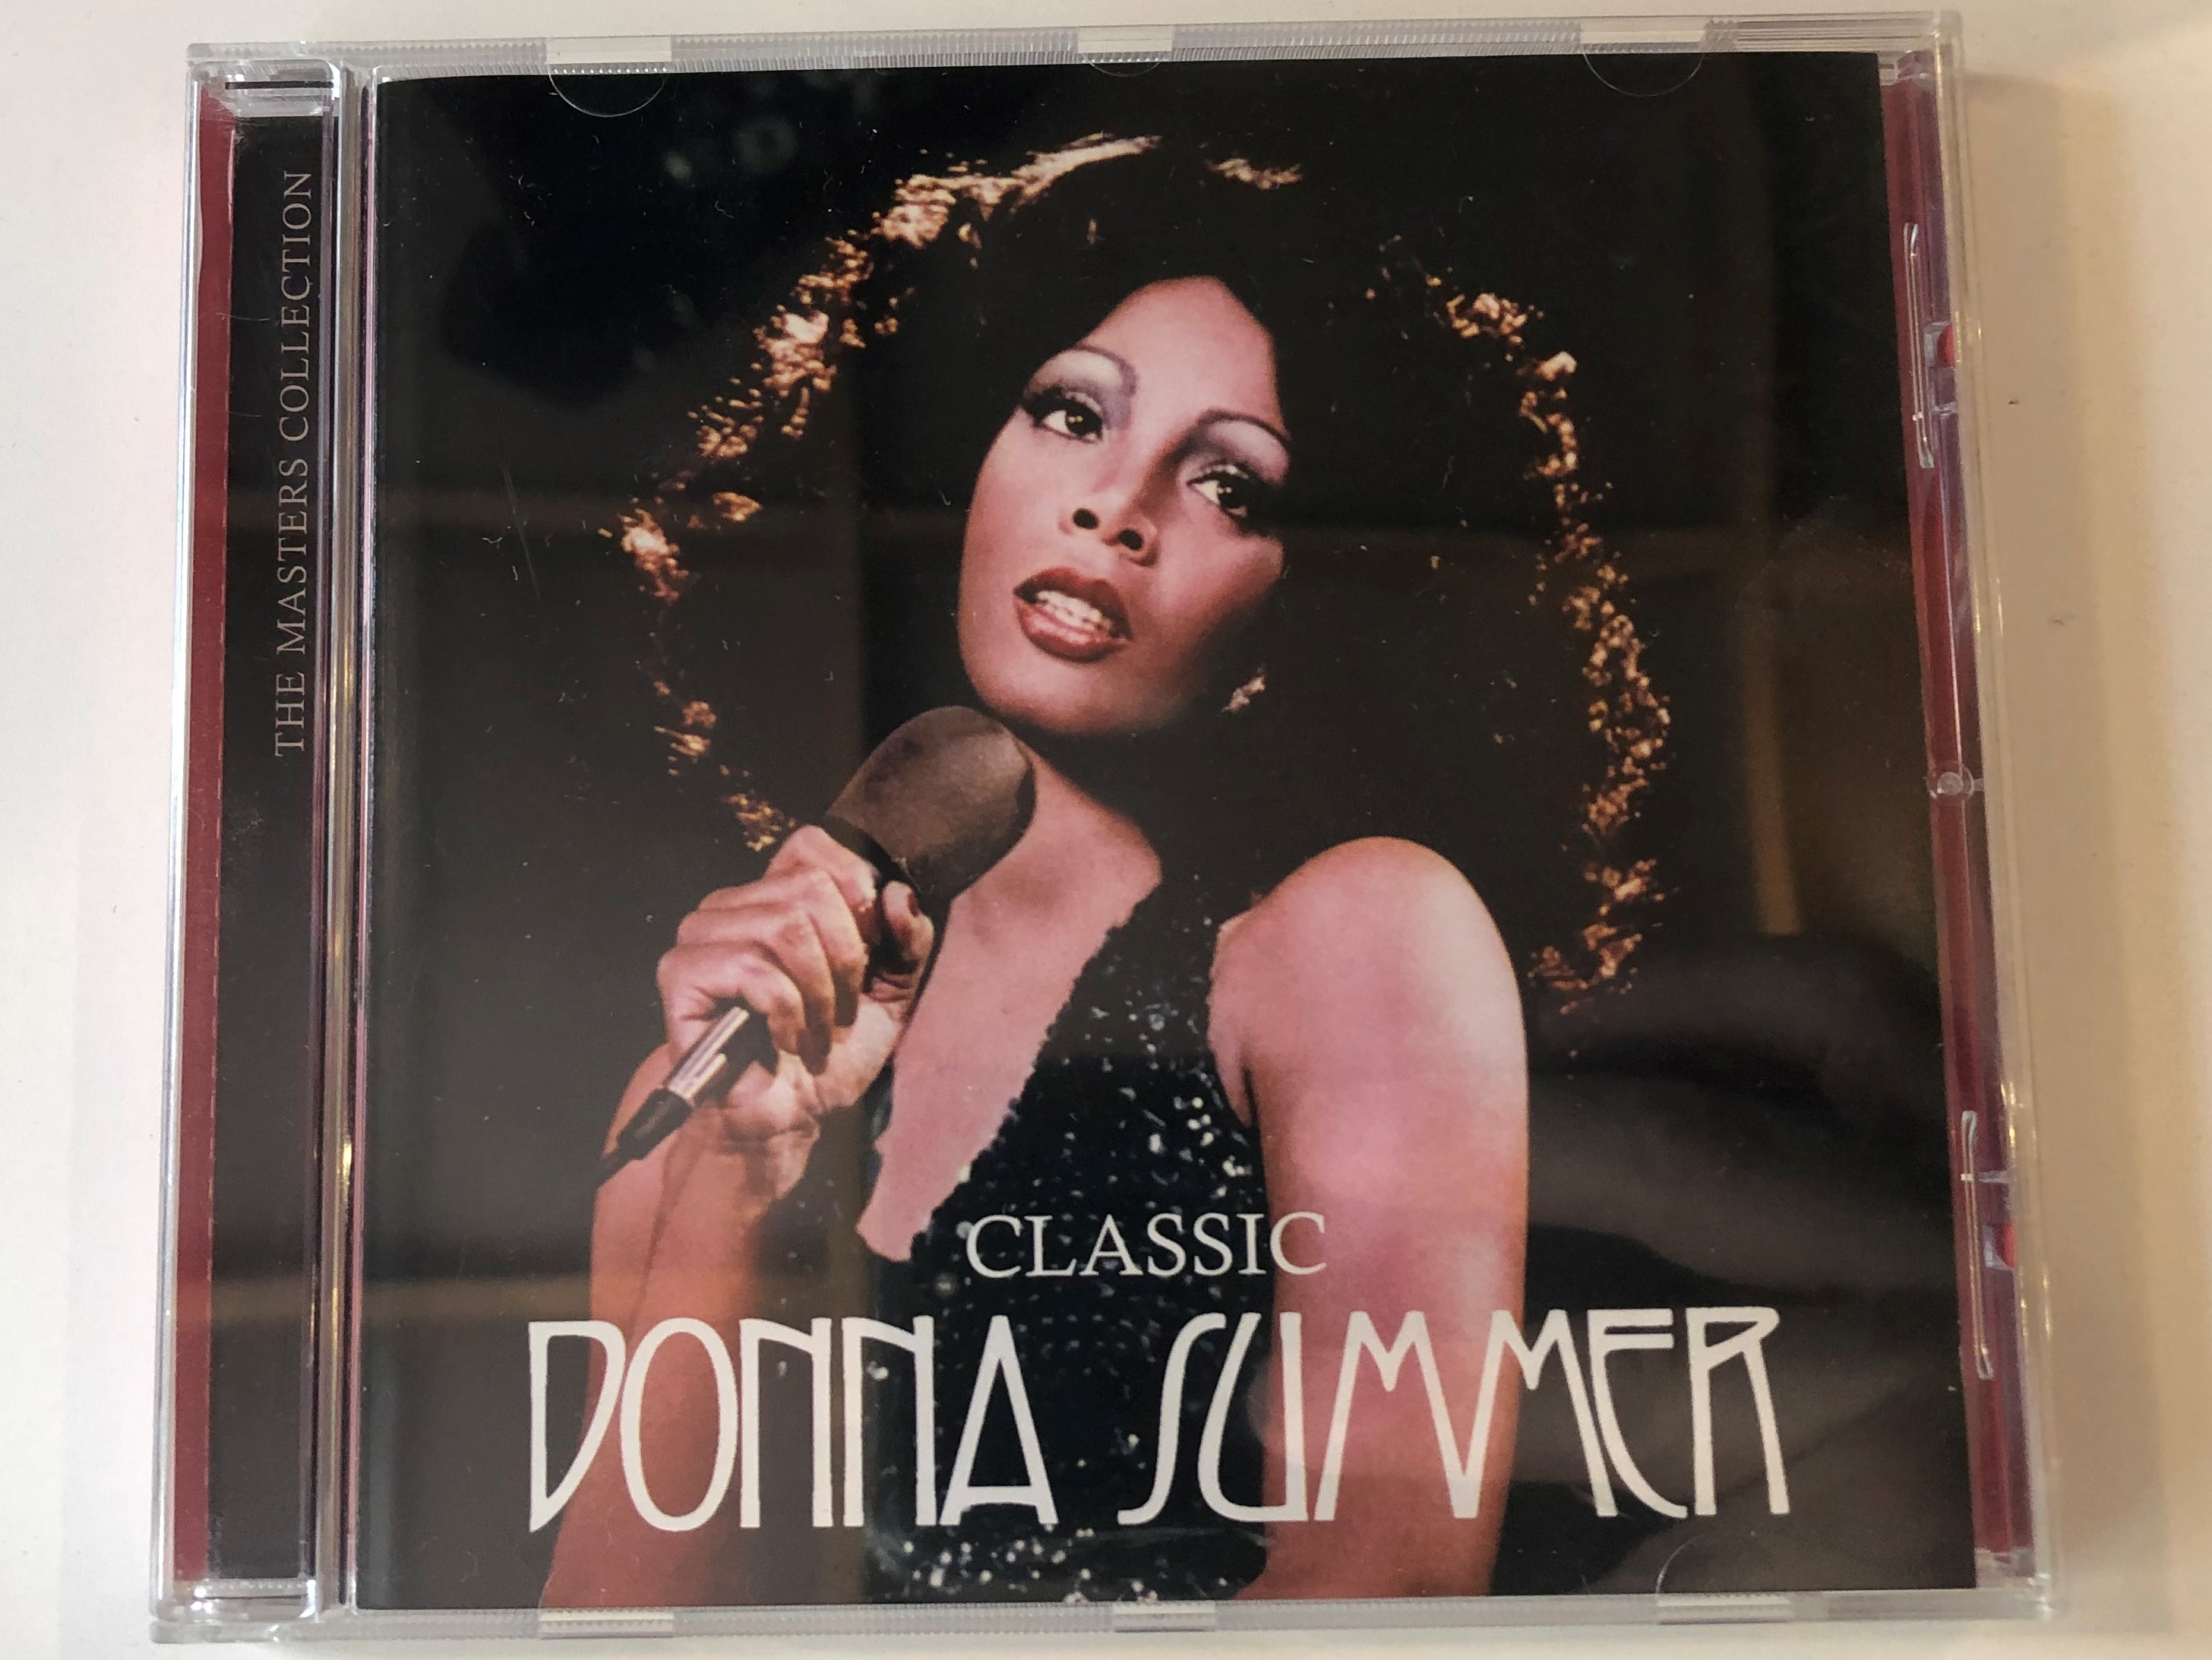 classic-donna-summer-the-masters-collection-spectrum-music-audio-cd-2009-umc5424-1-.jpg